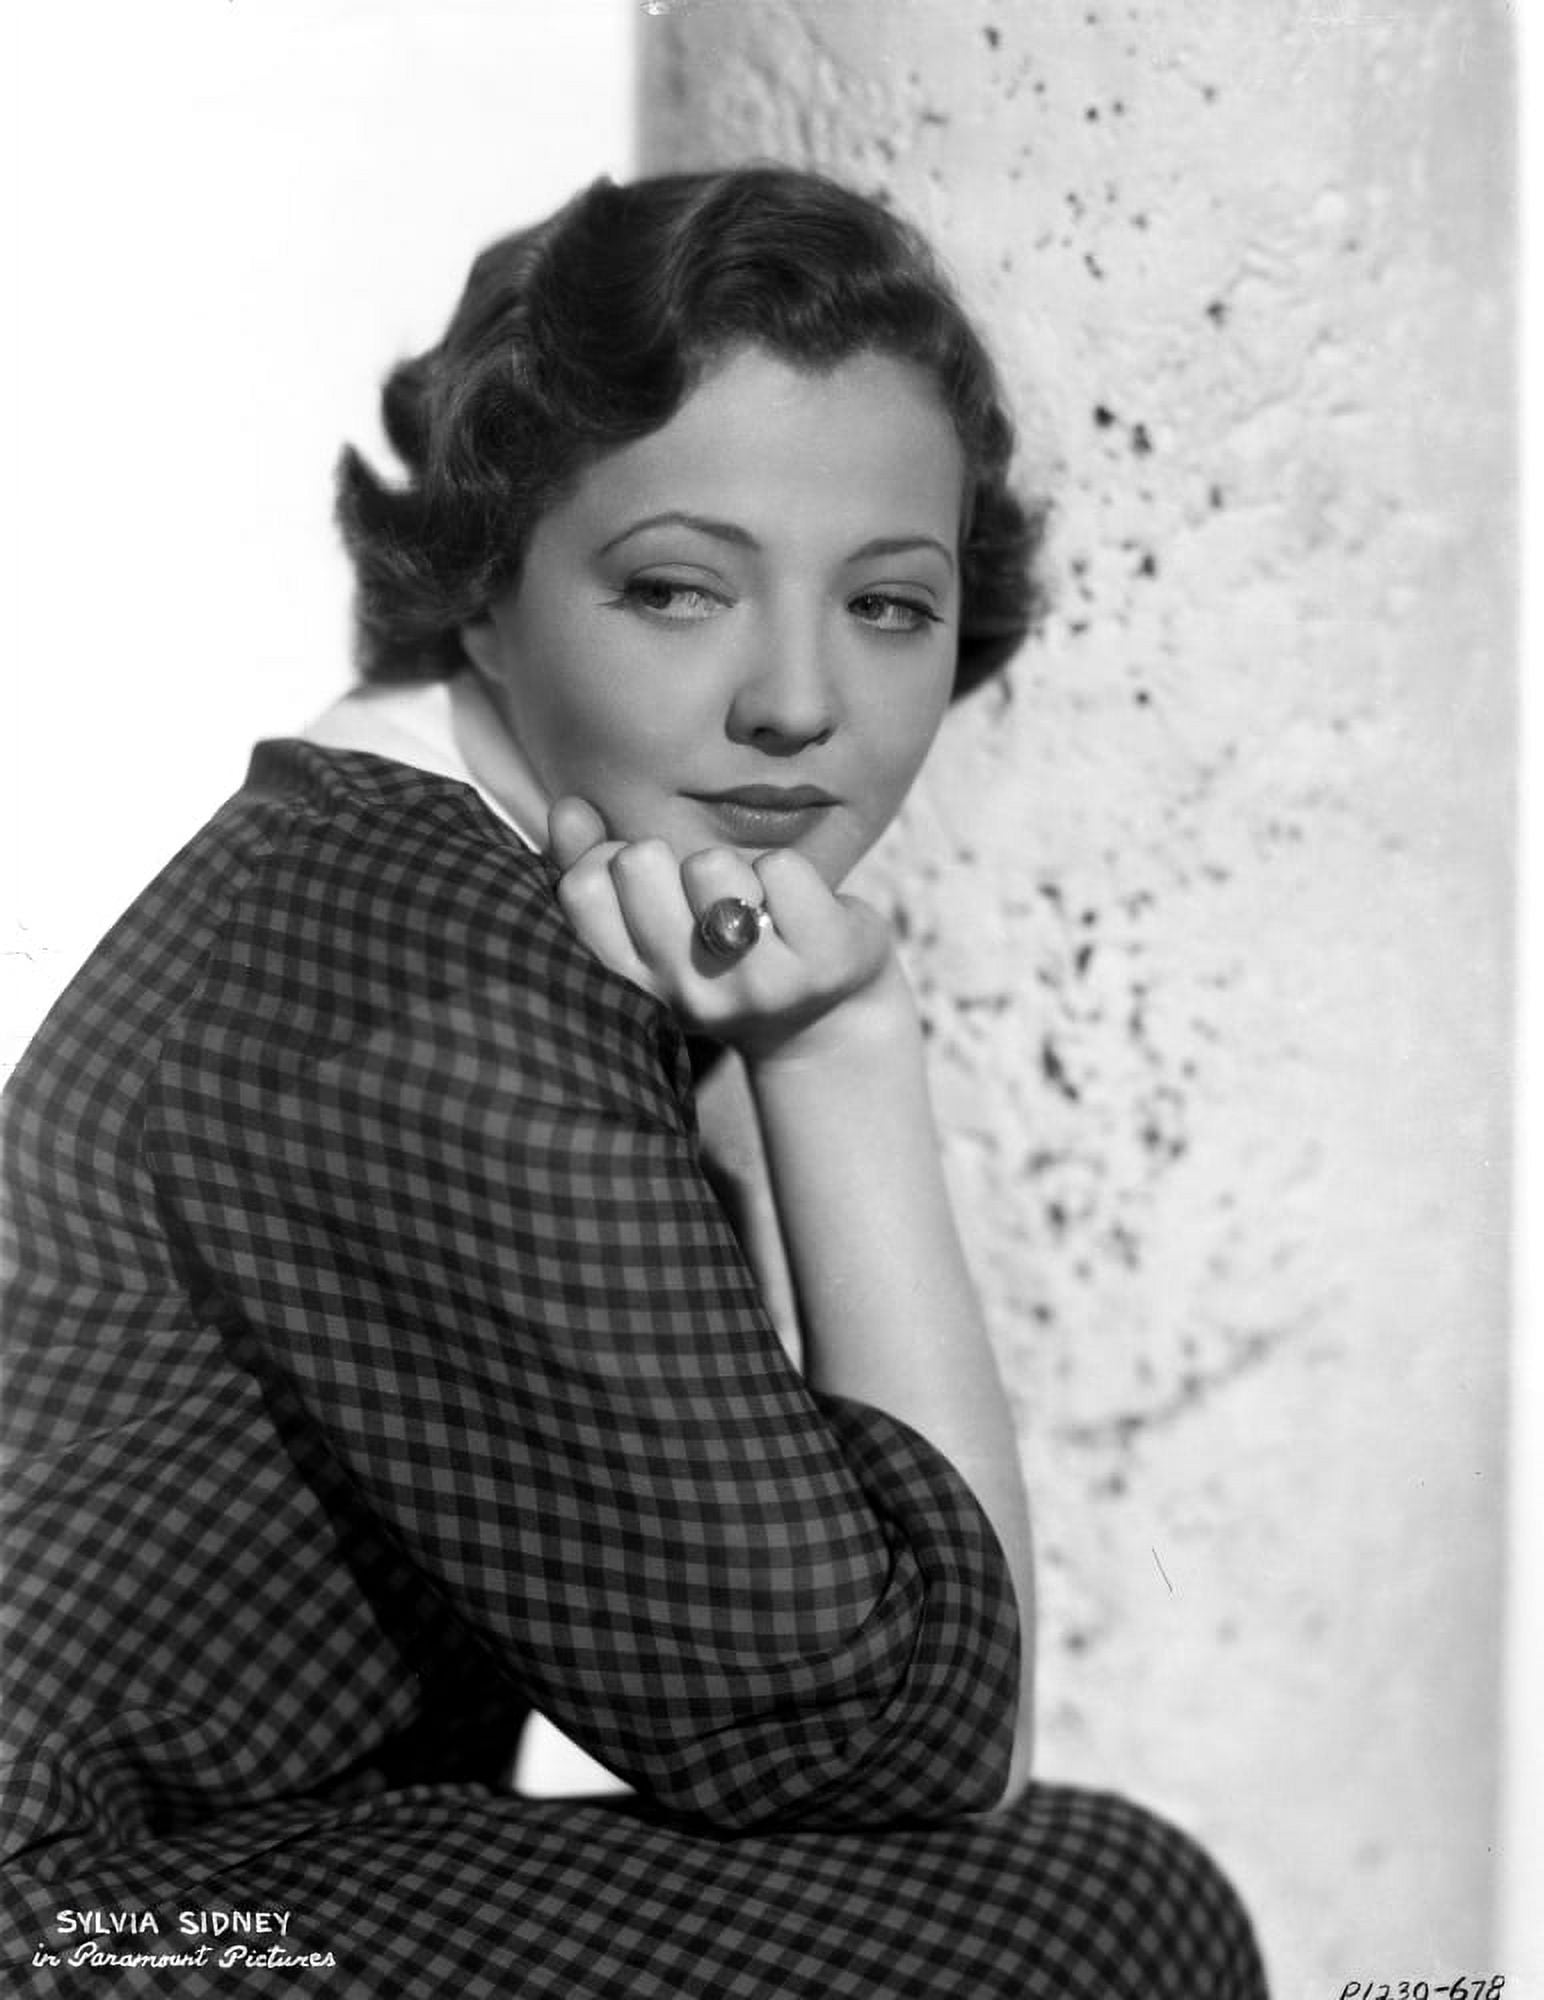 Sylvia Sidney sitting and Leaning Face on Hand in Printed Dress Photo Print  (24 x 30) 